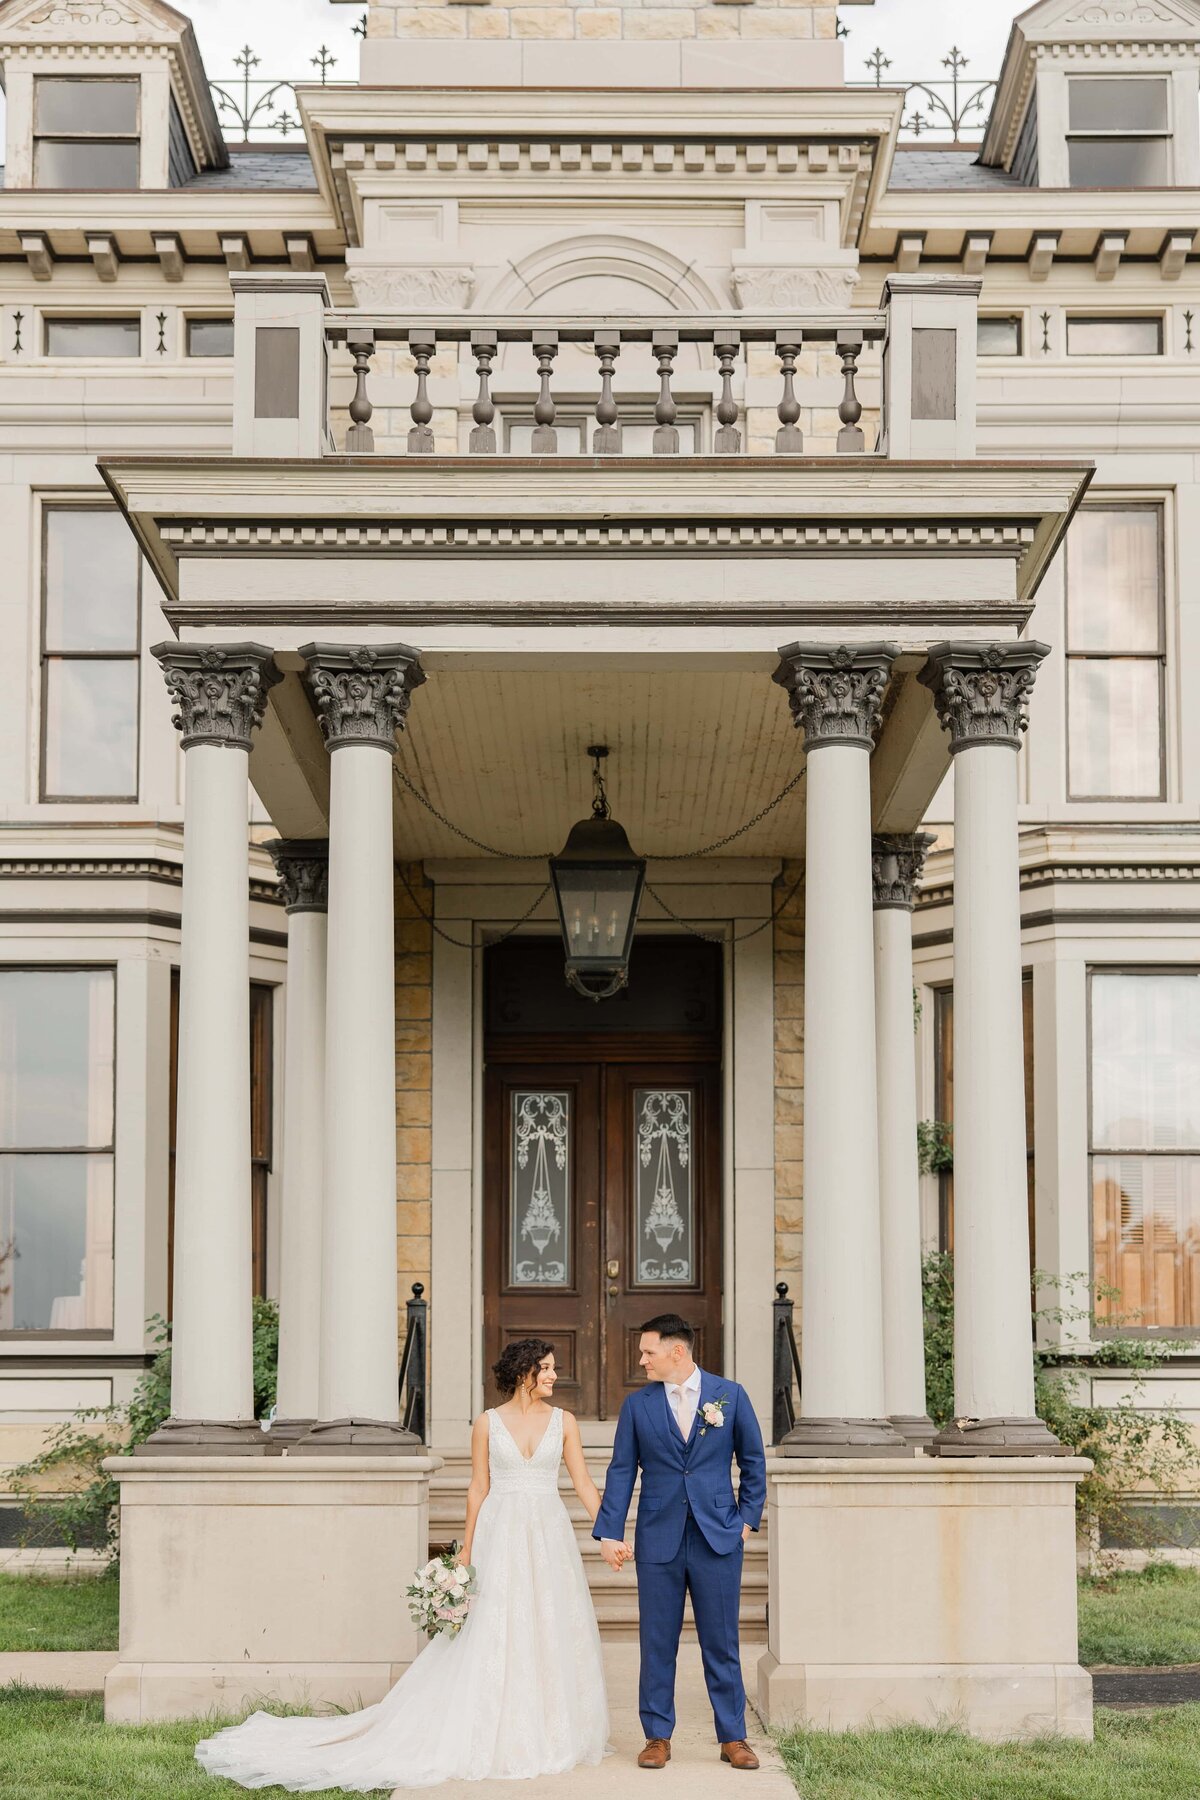 A bride in a white gown and a groom in a blue suit holding hands in front of an ornate historical mansion with columns and balconies at an event in Davenport.